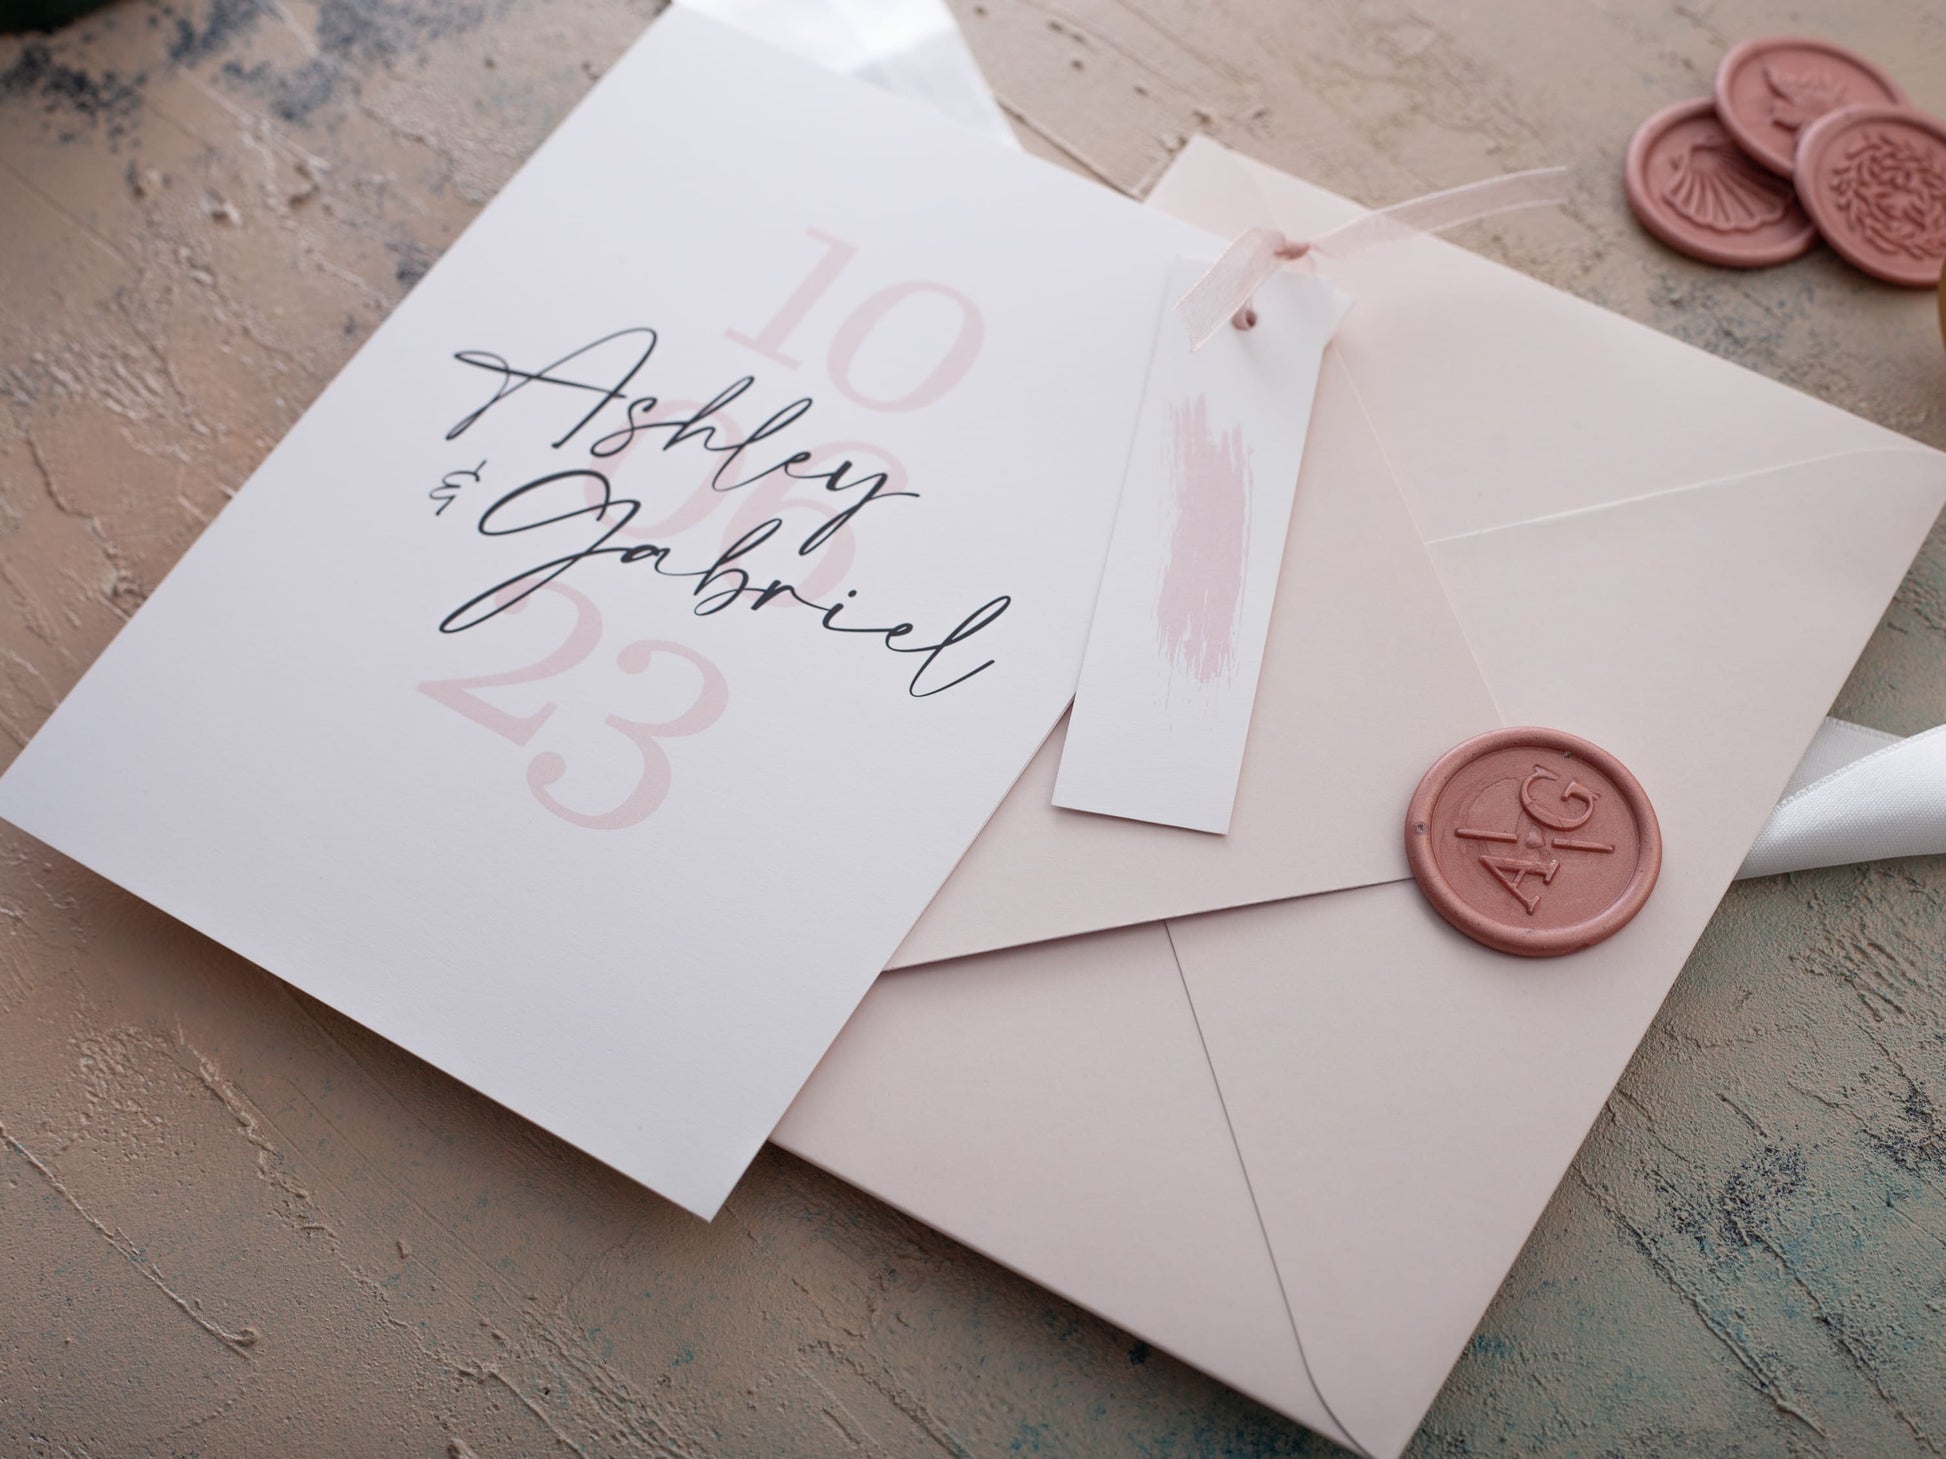 Modern wedding invitation with pink envelope and name tag